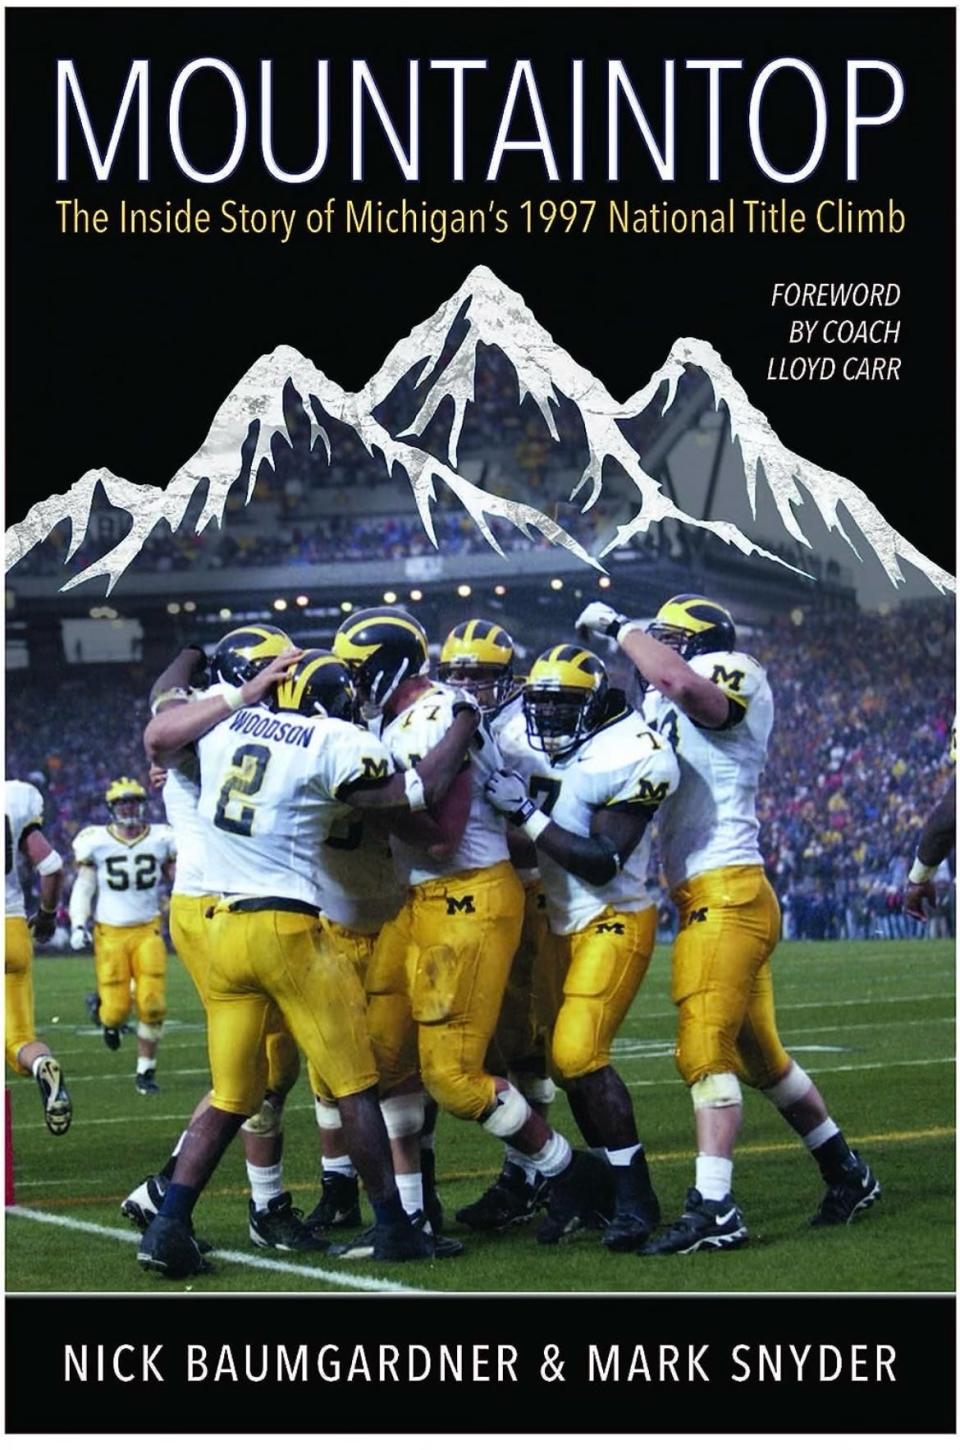 Book cover of "Mountaintop: The Inside Story of Michigan's 1997 National Title Climb."